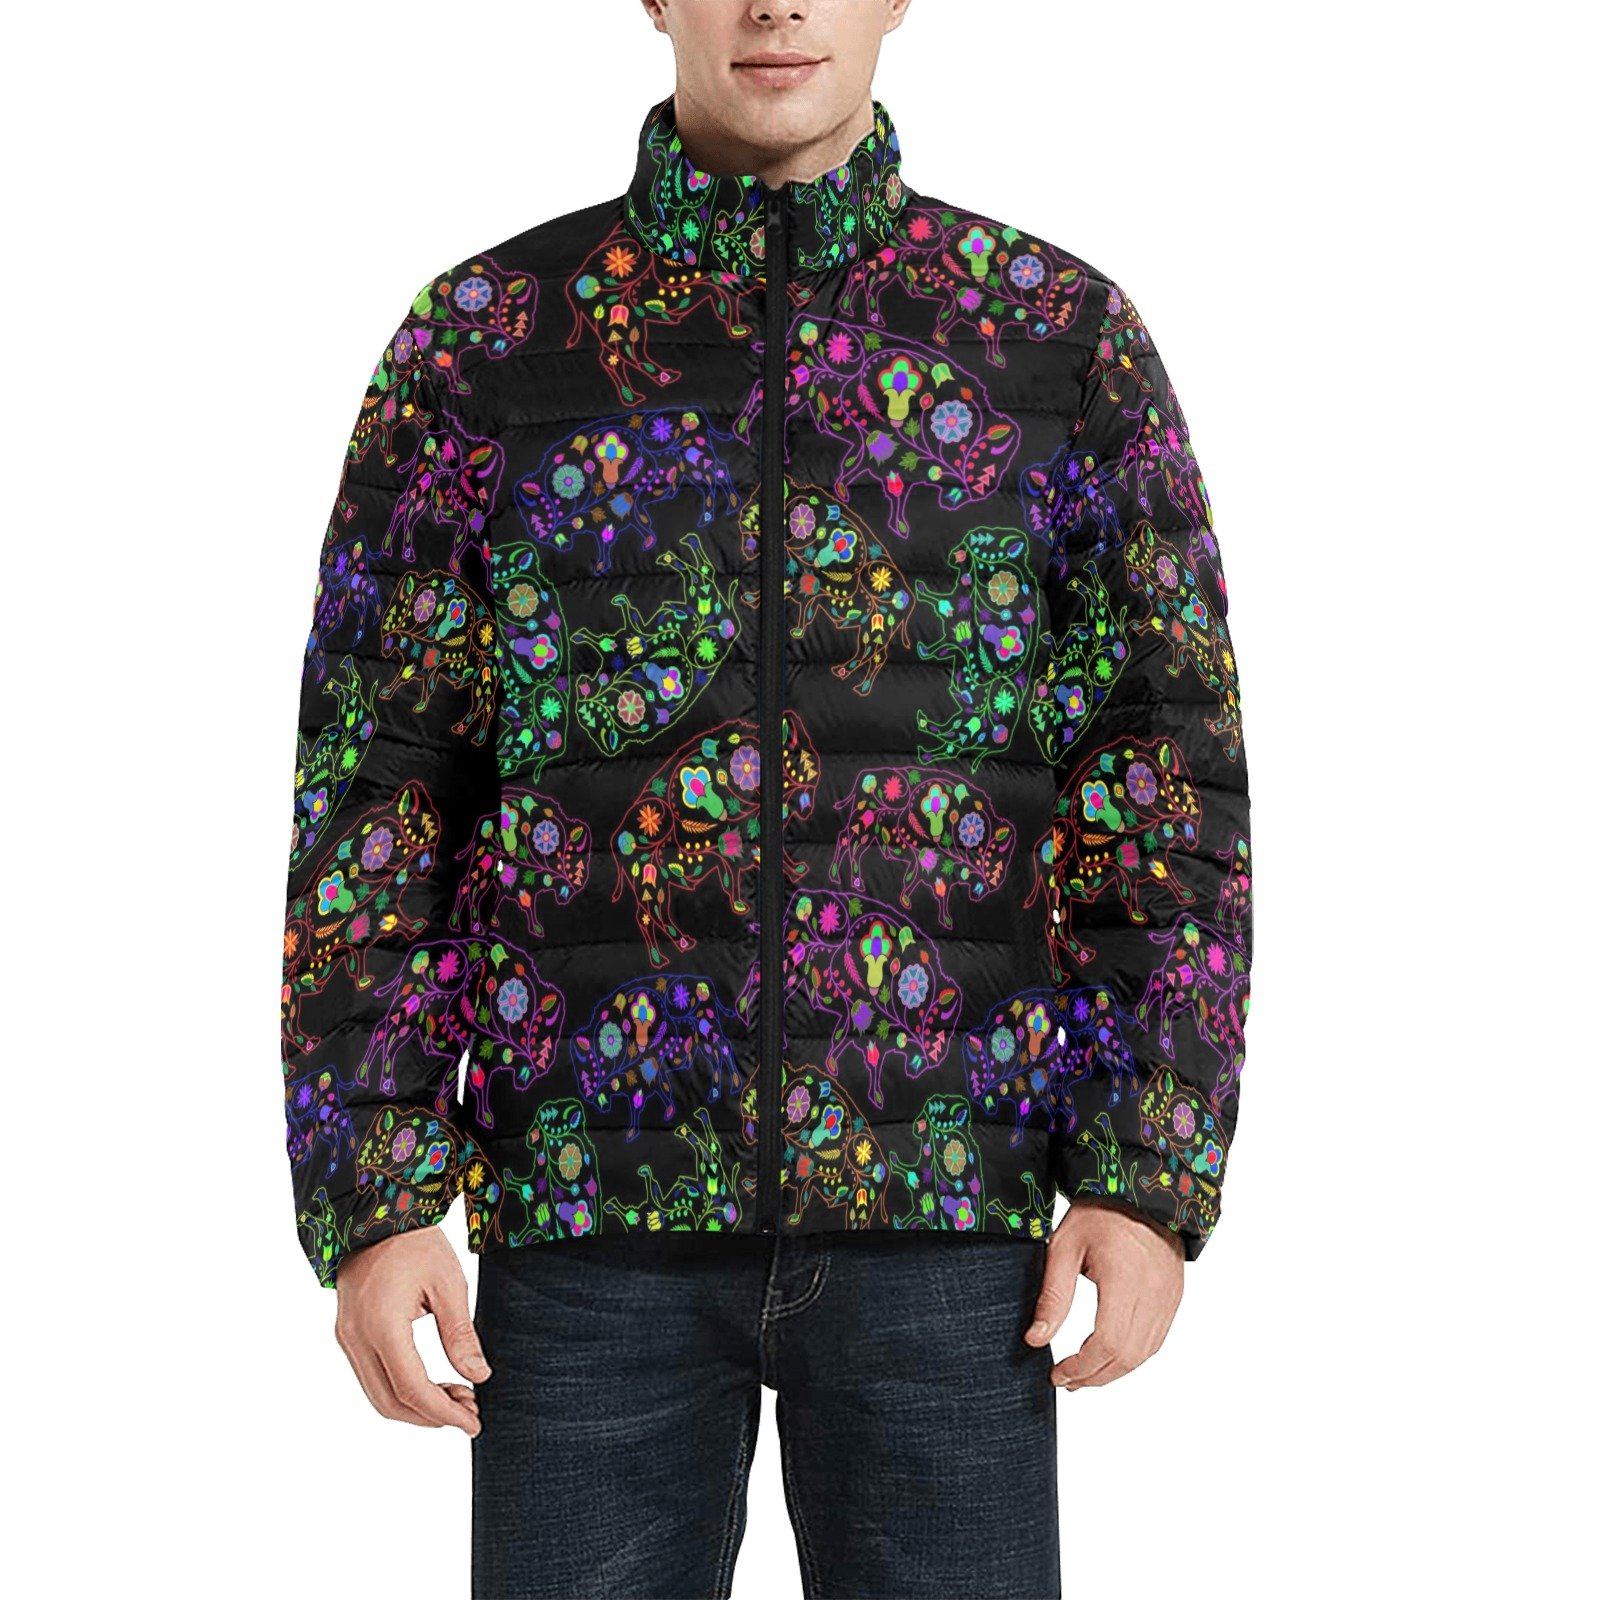 Floral Buffalo Men's Stand Collar Padded Jacket (Model H41) Men's Stand Collar Padded Jacket (H41) e-joyer 